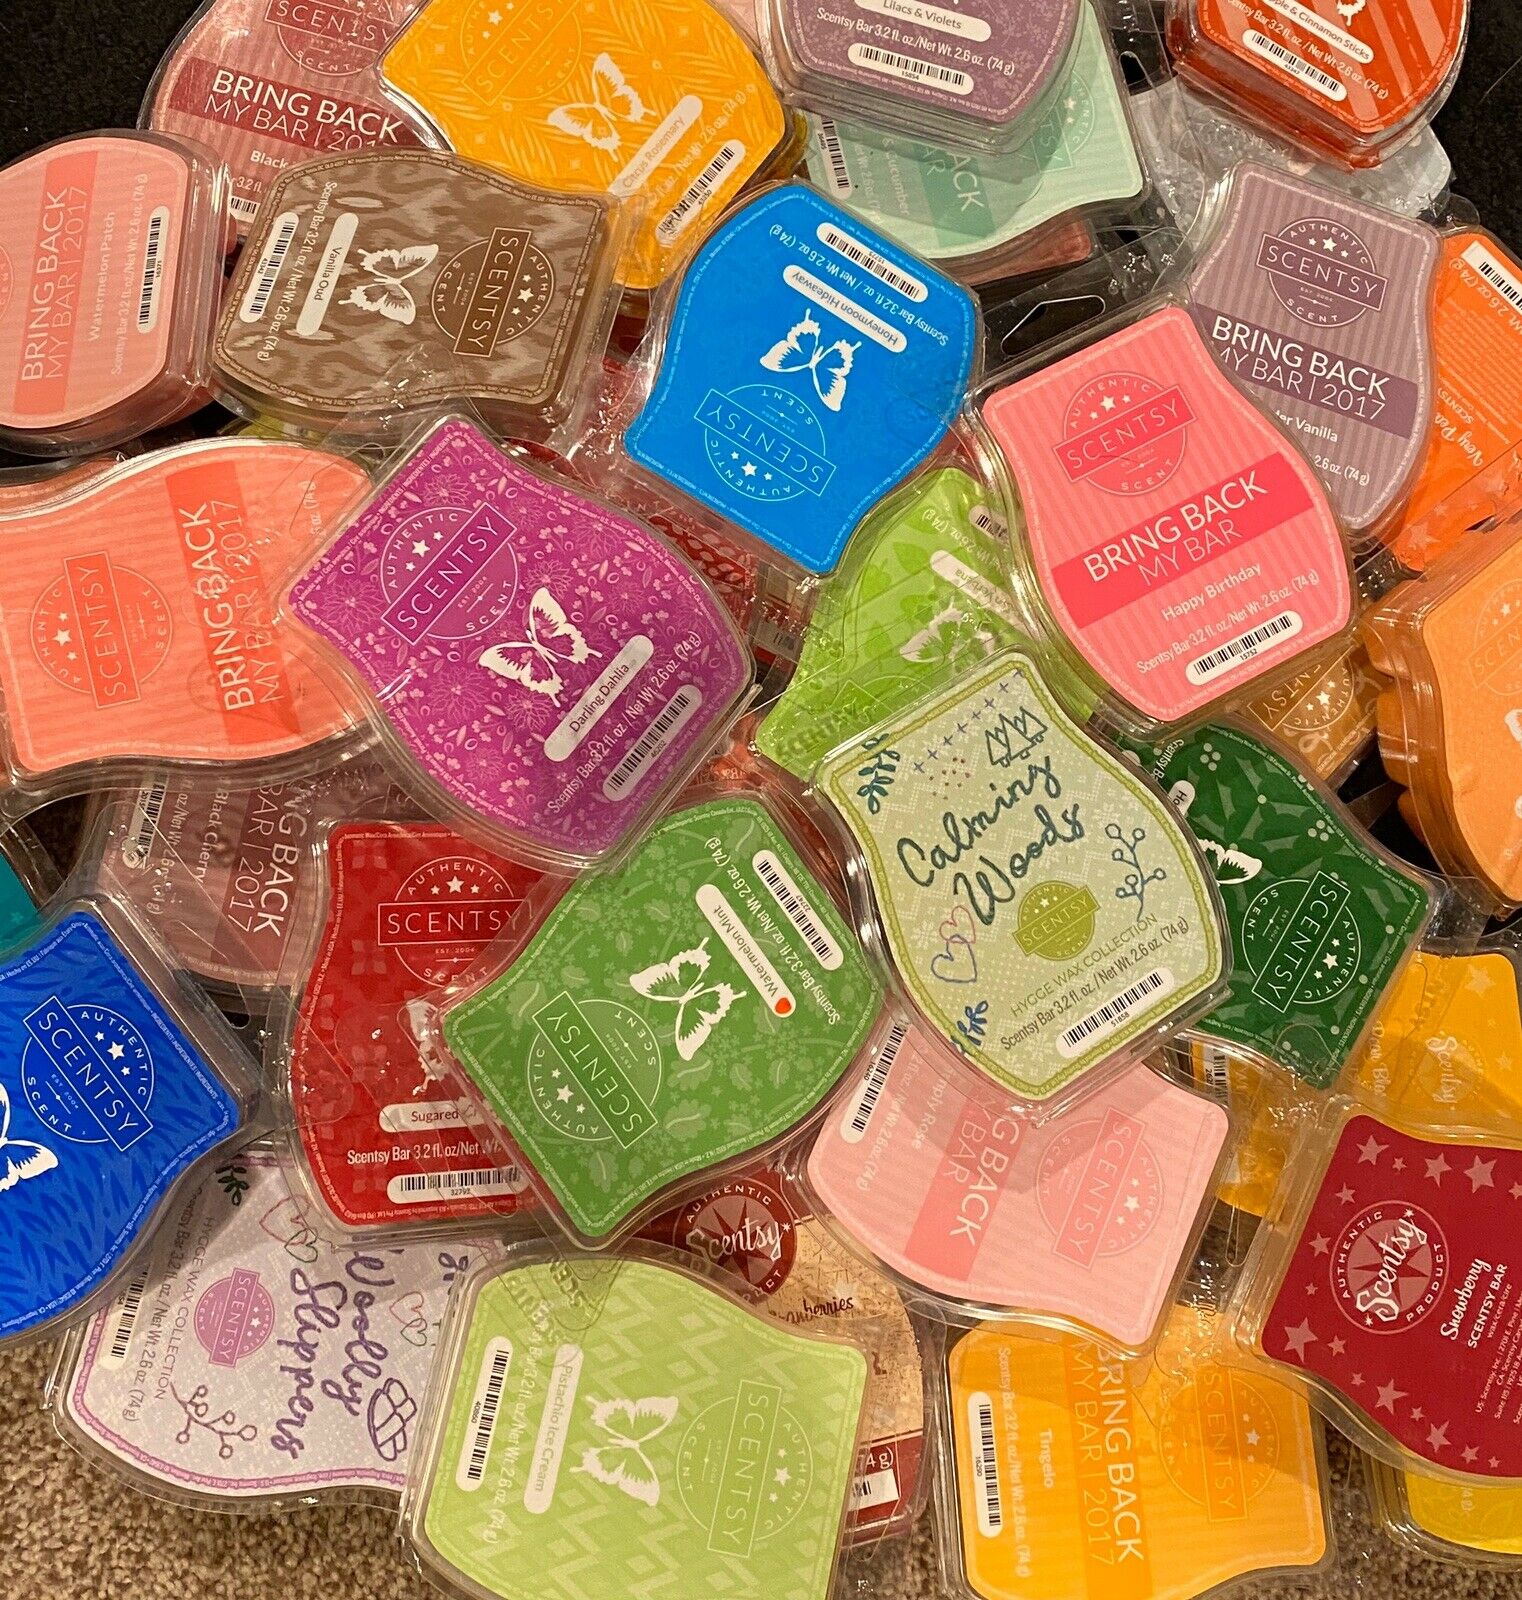 Top Selling Scentsy Wax Bars For Wax Warmer **new** Pick Your Favorite Scents!